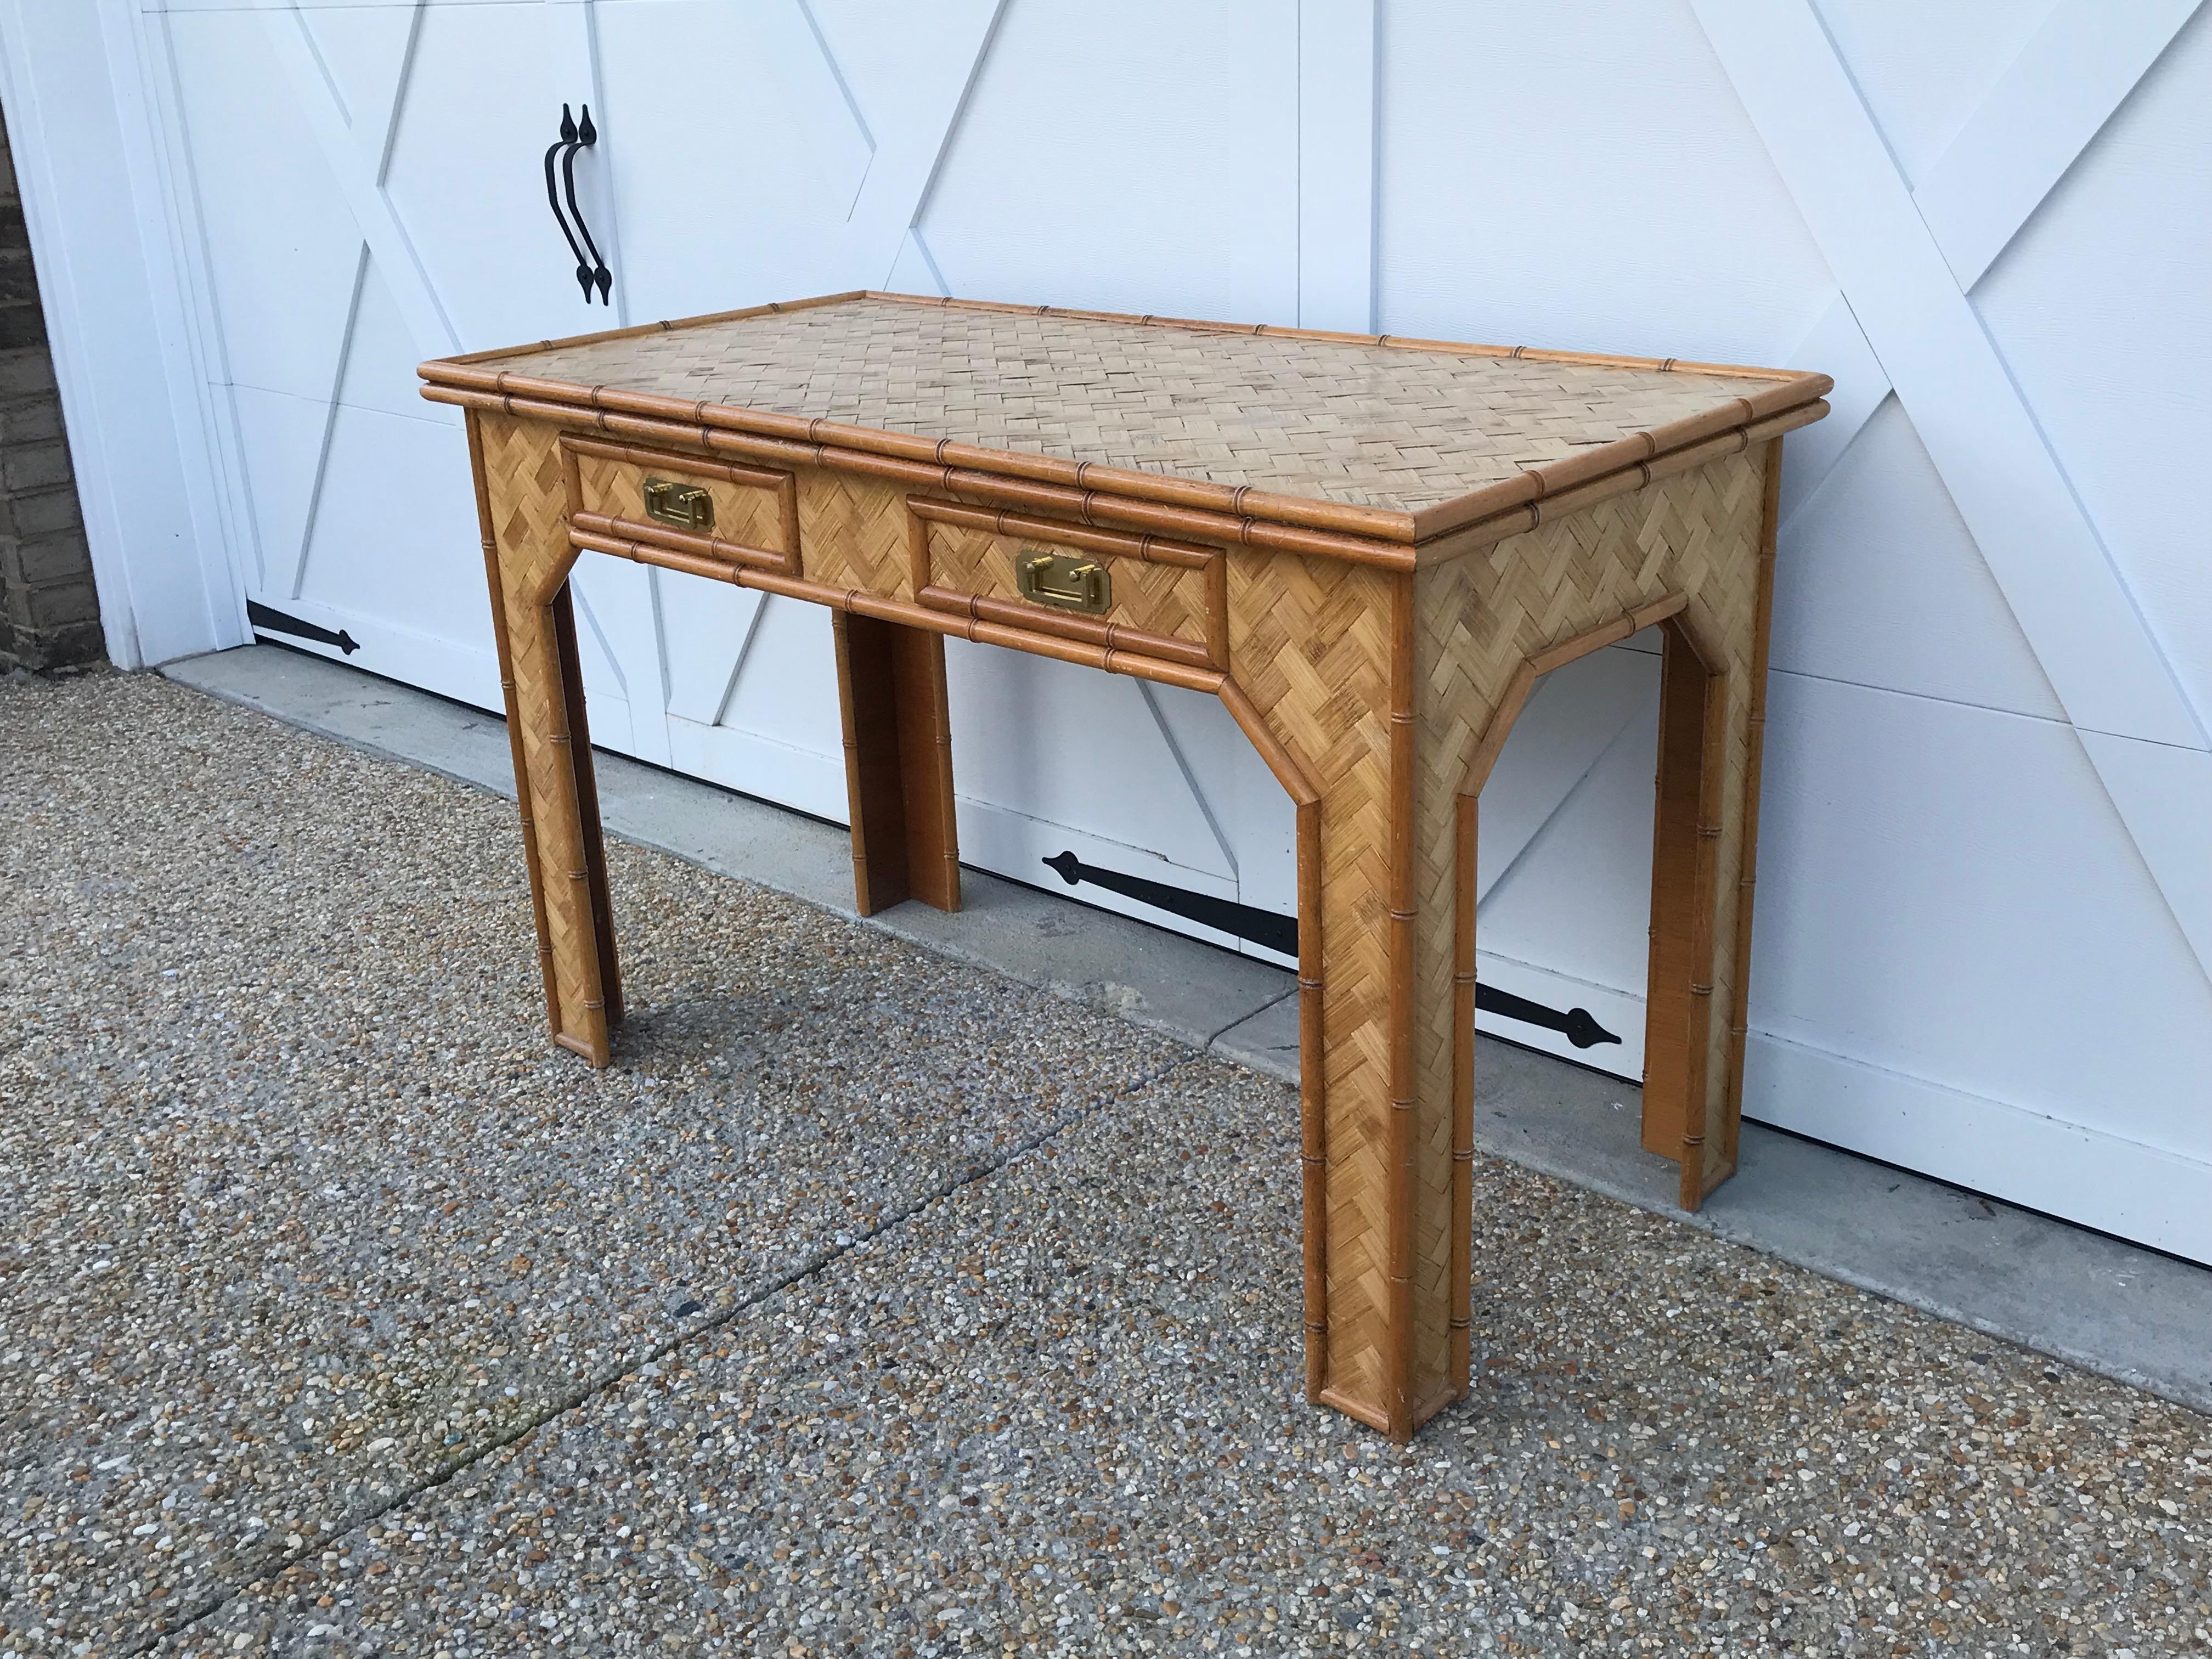 Offered is a stunning, 1970s bamboo writing desk with brass campaign-style hardware. This desk is in great condition and has ample room for working. The two drawers add a sleek storage component. Sturdy and stable, not wobbly. Top has a small lip,